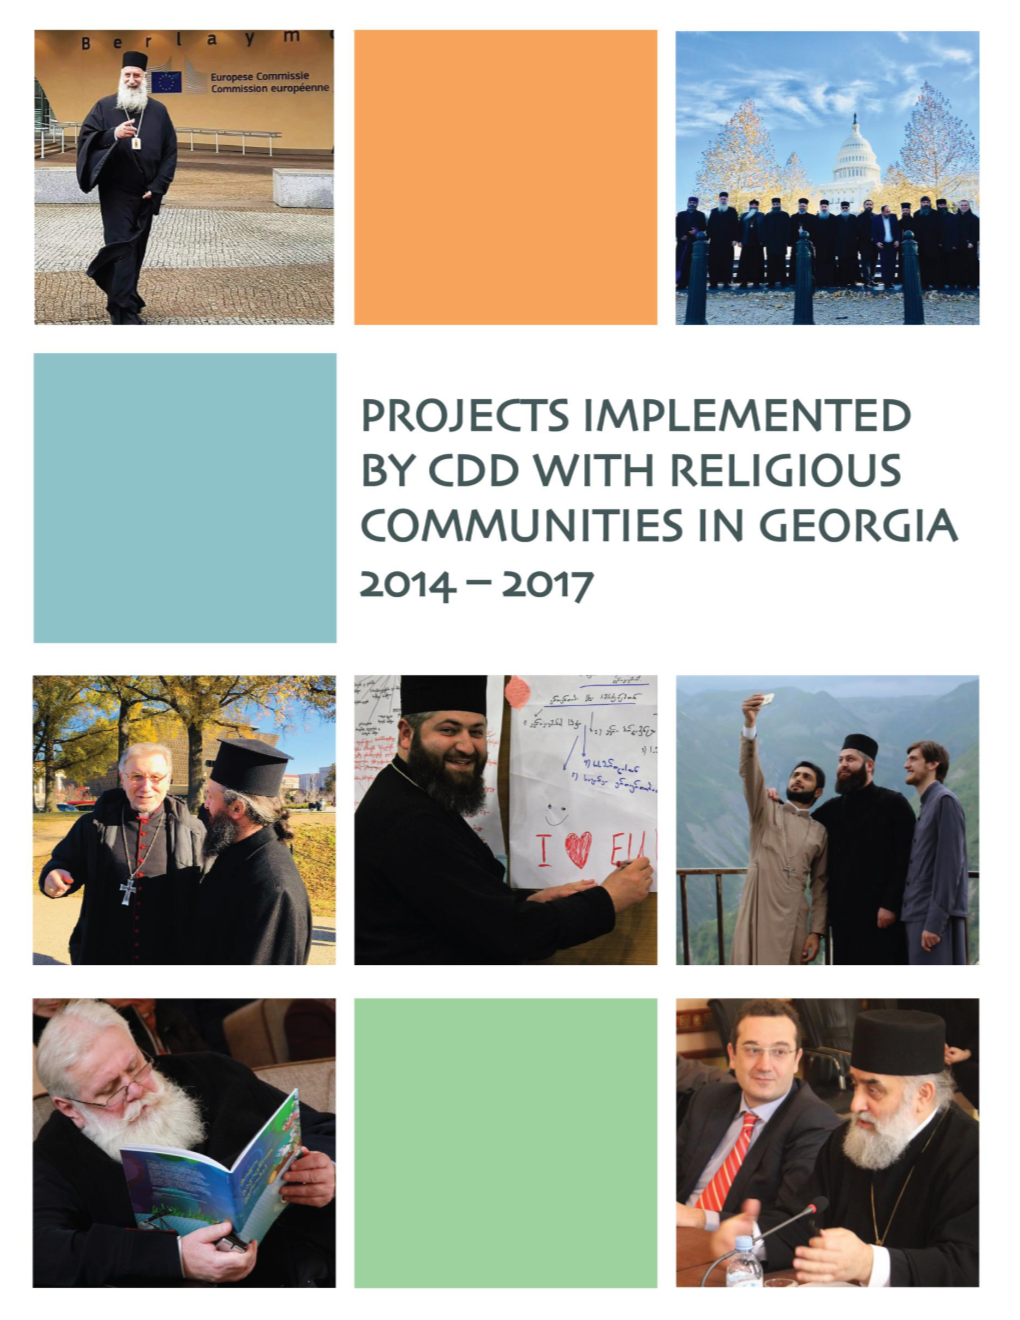 Projects Implemented by CDD with the Georgian Orthodox Church 2014 – 2017